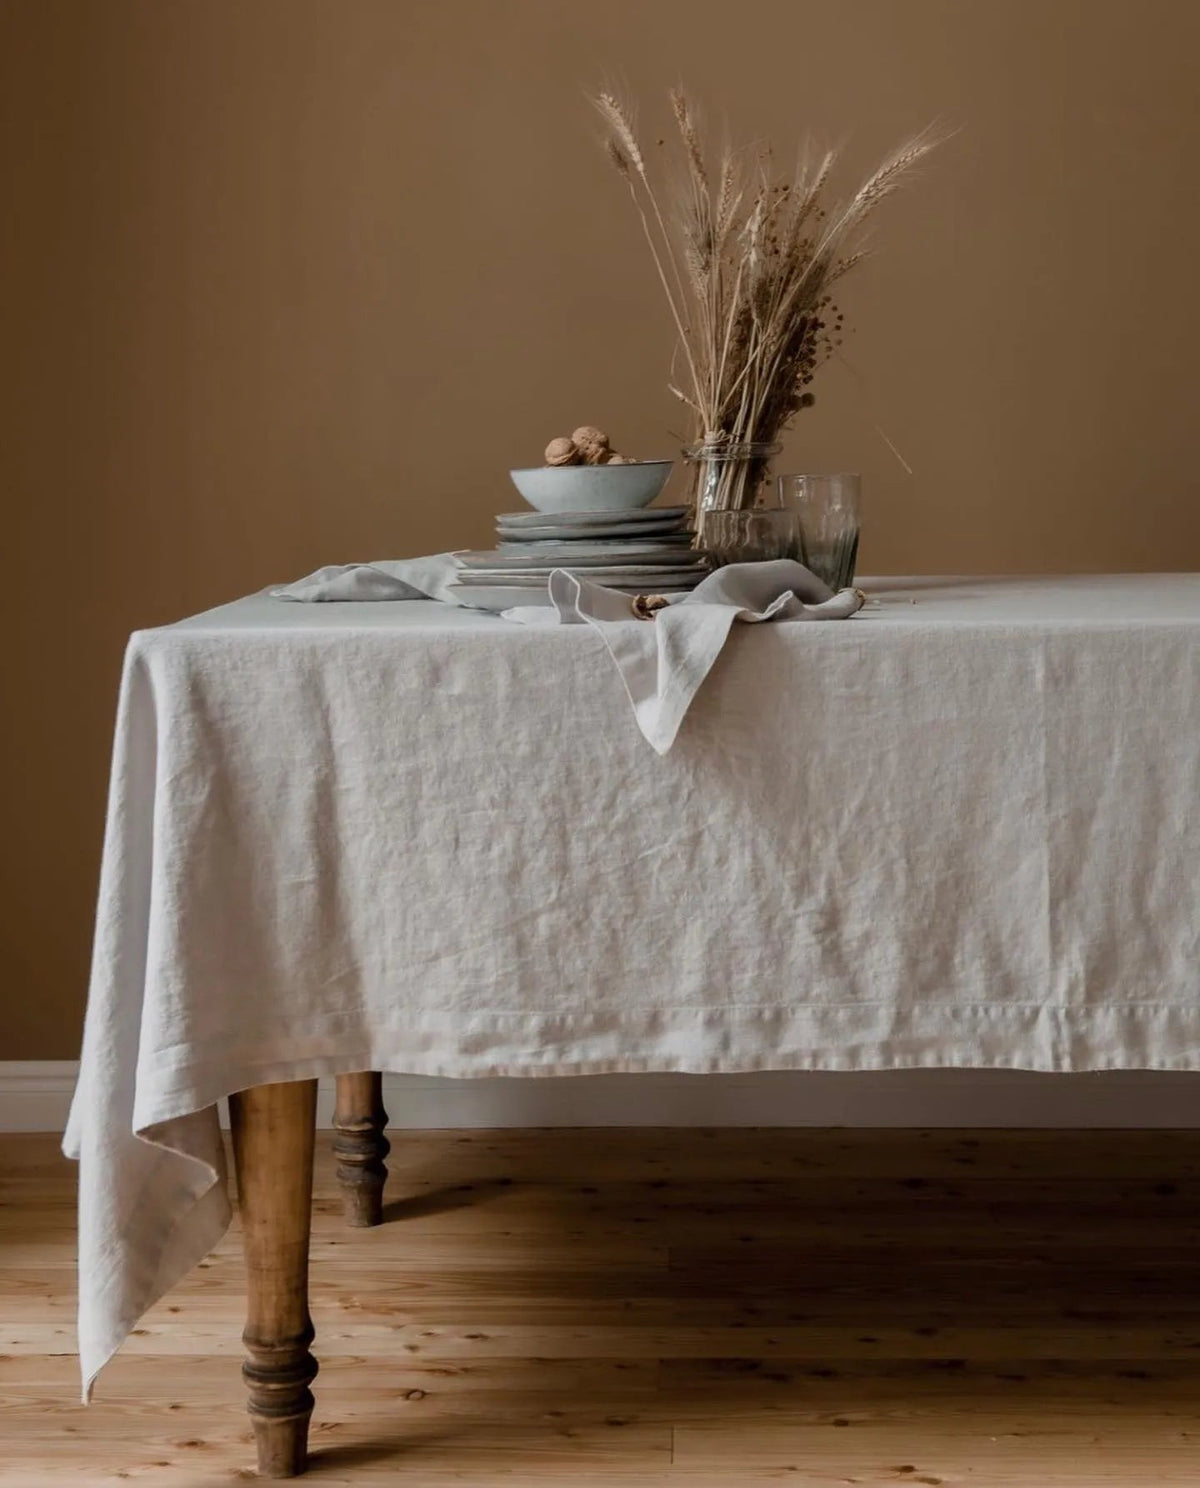 Natural Hues 100% Linen Table Cloth | Hypoallergenic - Allergy Friendly - Naturally Free